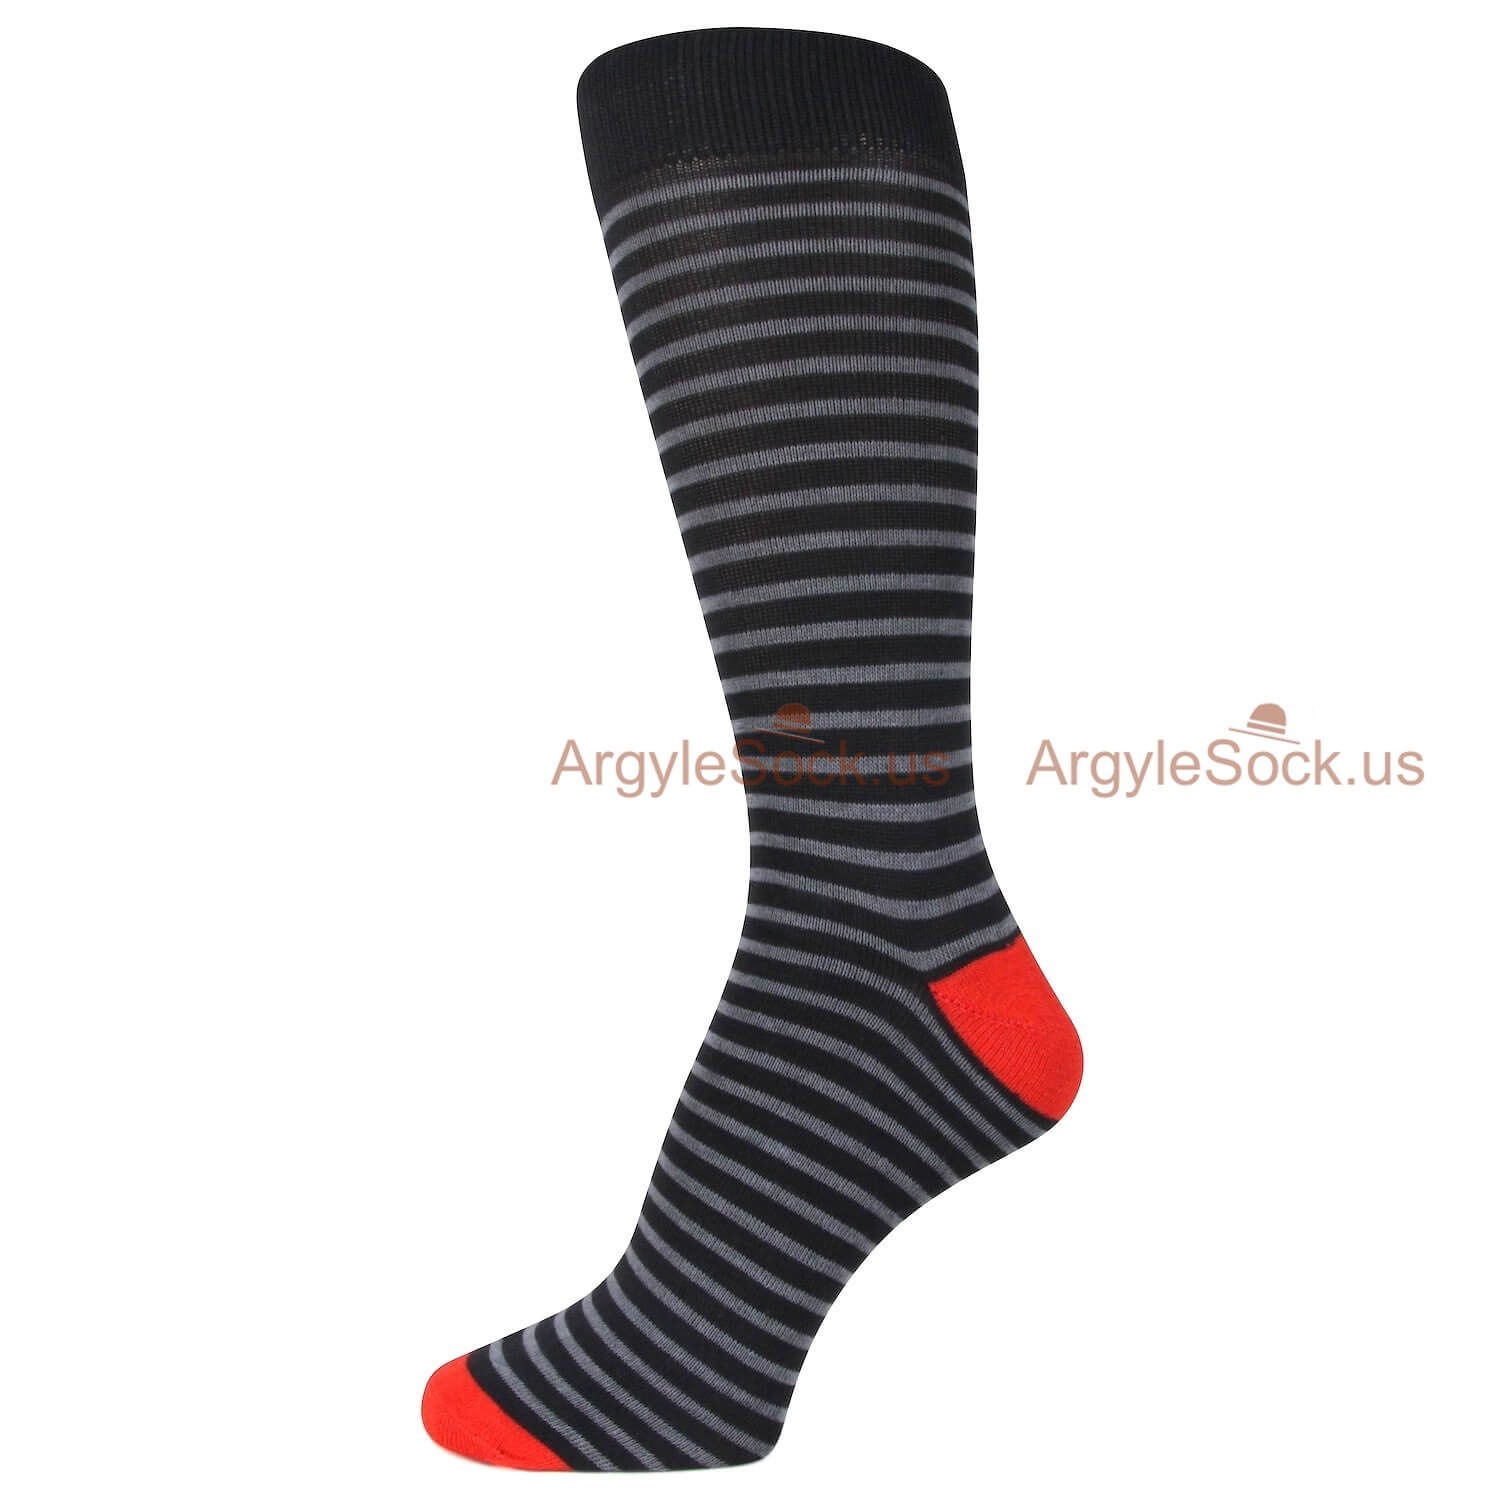 Black With White Stripes and Red Mens Socks